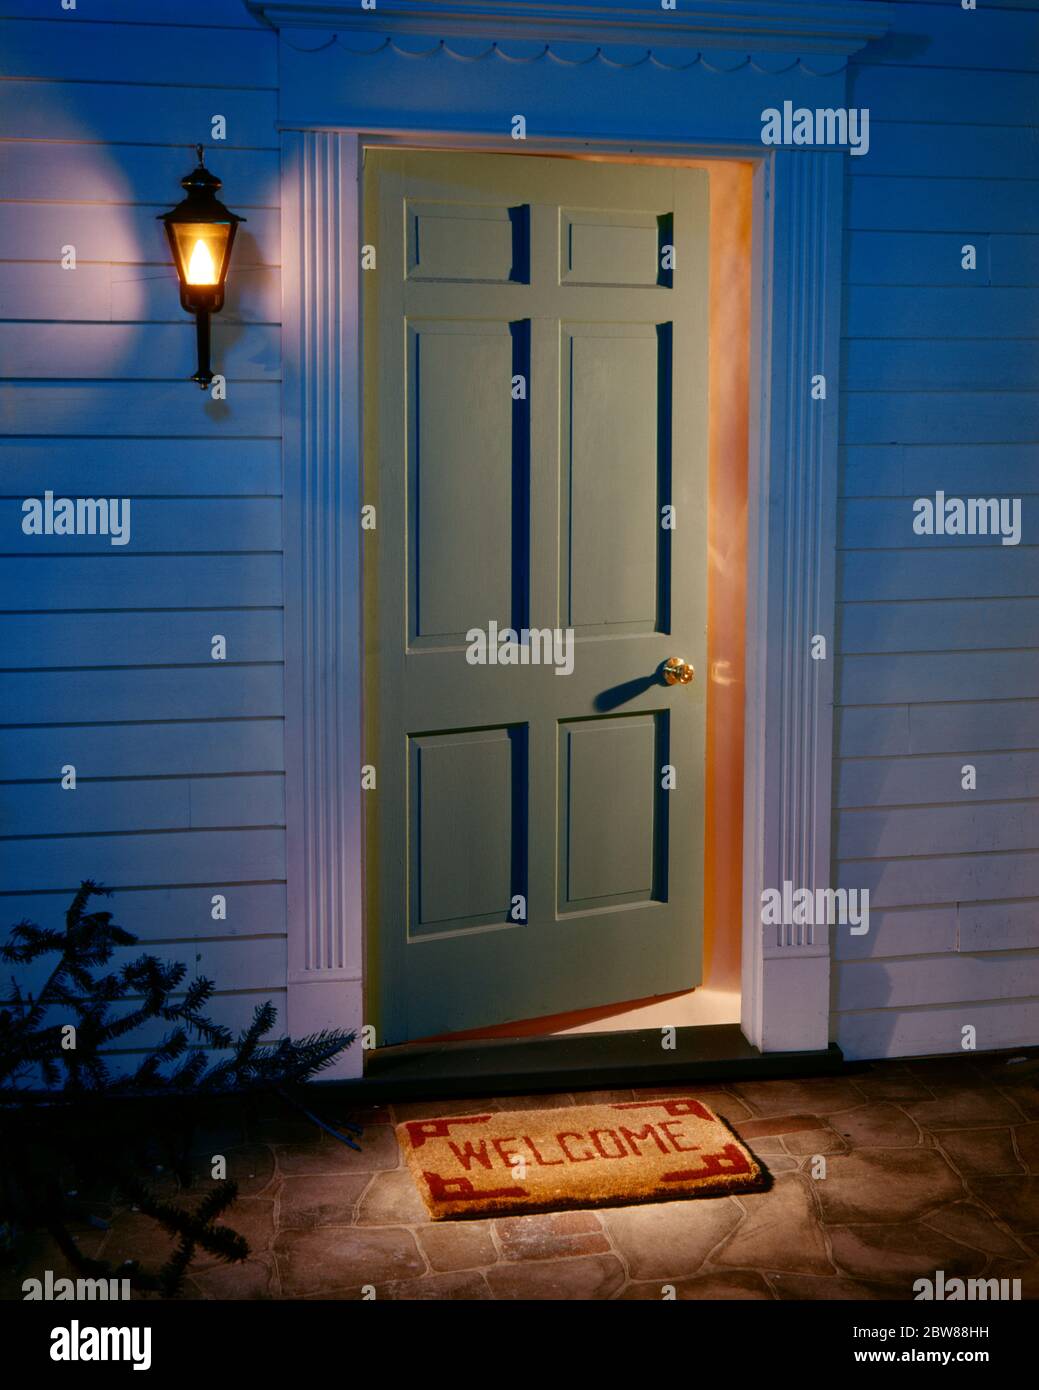 1970s OPEN FRONT HOME DOORWAY AT NIGHT WITH WELCOME MAT LIGHTS ON INSIDE AND LANTERN ON SIDE OF HOUSE  - kd2844 PHT001 HARS AT OF ON HOMES CONCEPT CONCEPTUAL RESIDENCE SYMBOLIC CONCEPTS OLD FASHIONED REPRESENTATION Stock Photo